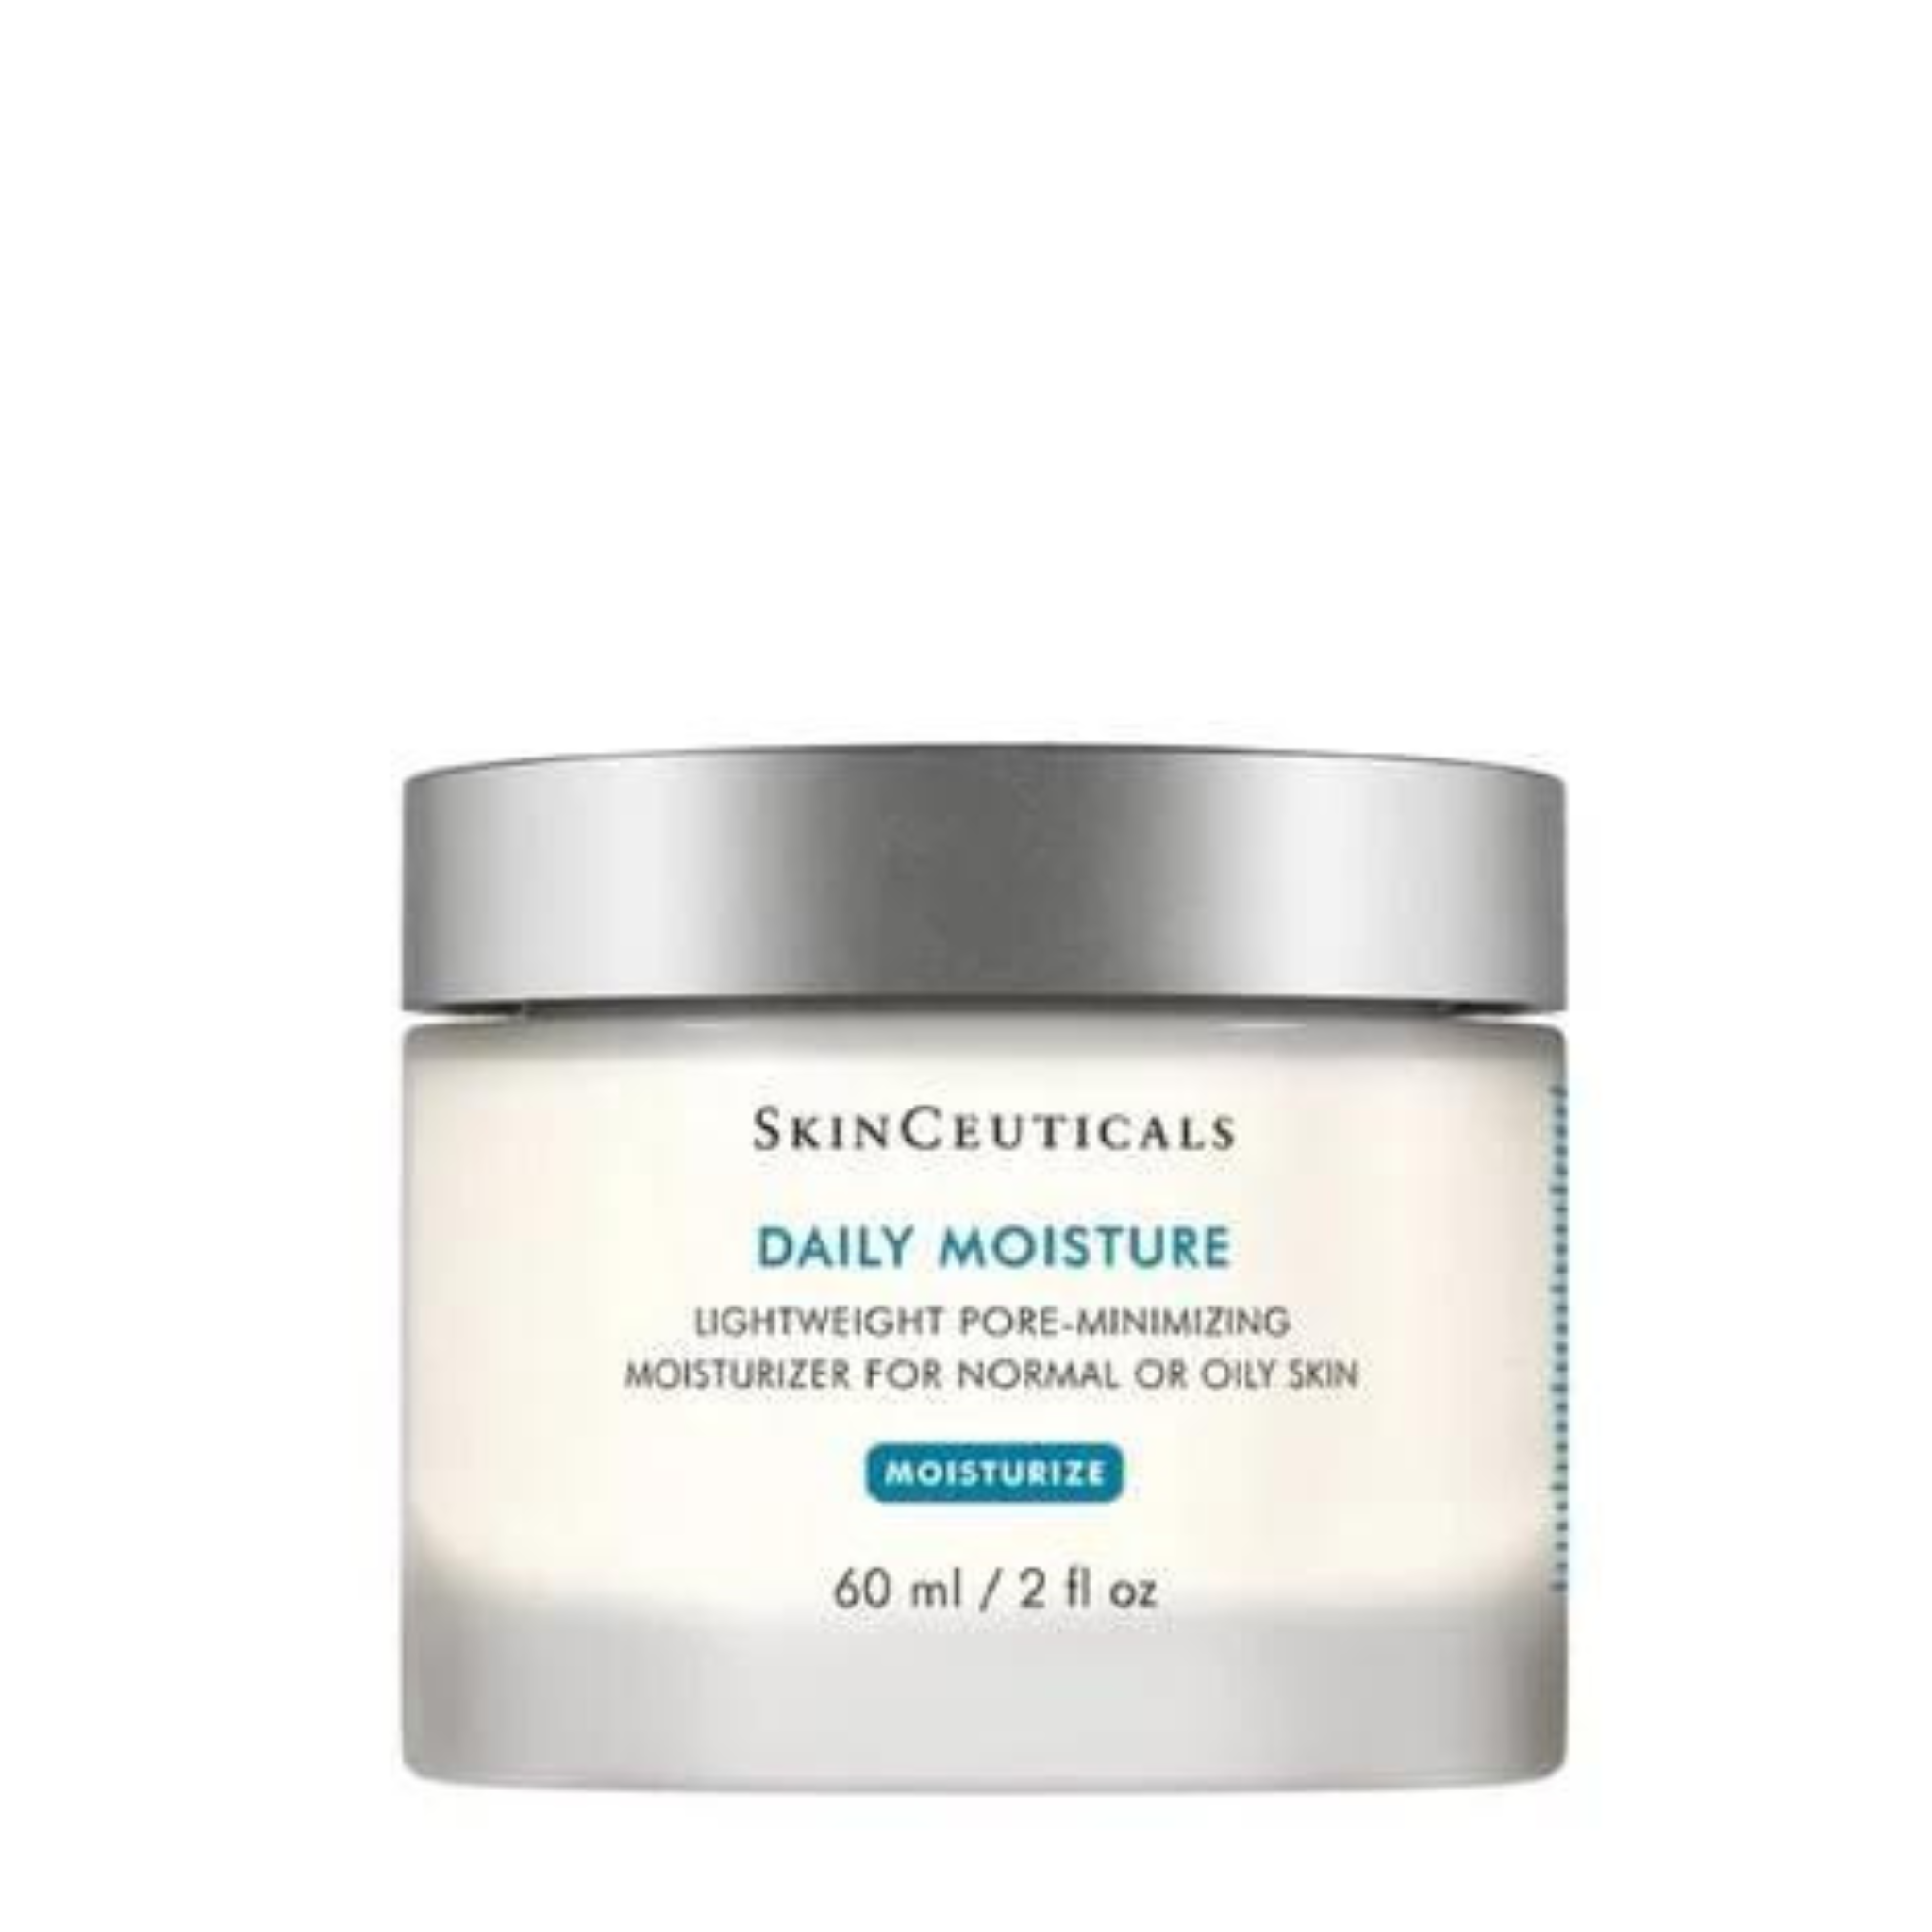 SkinCeuticals Daily Moisture 60ml - Aesthetic Code